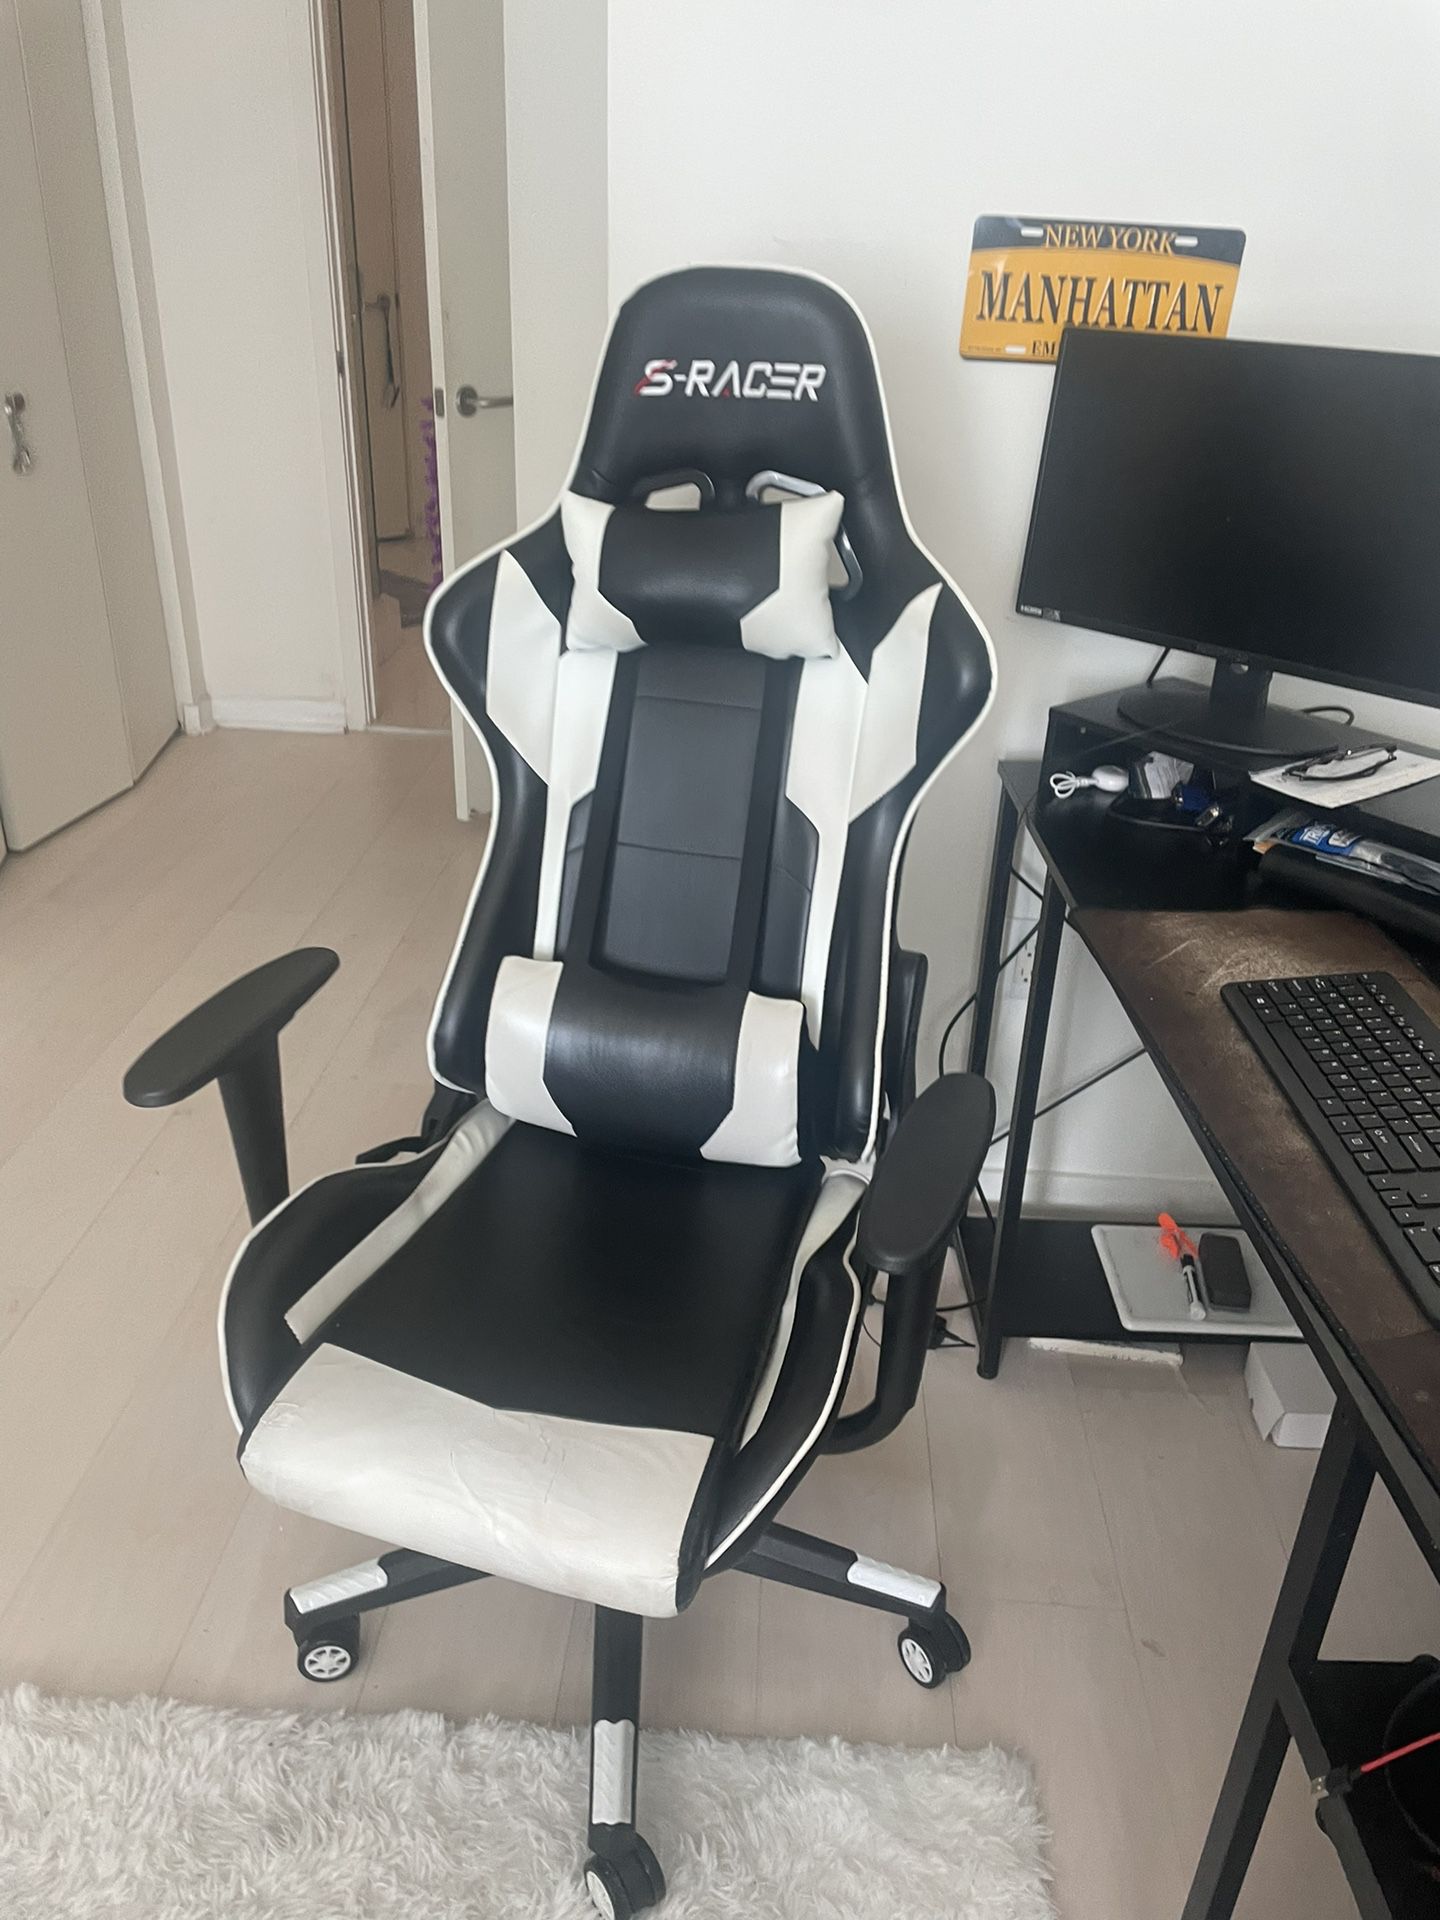 Gaming Chair & Desk